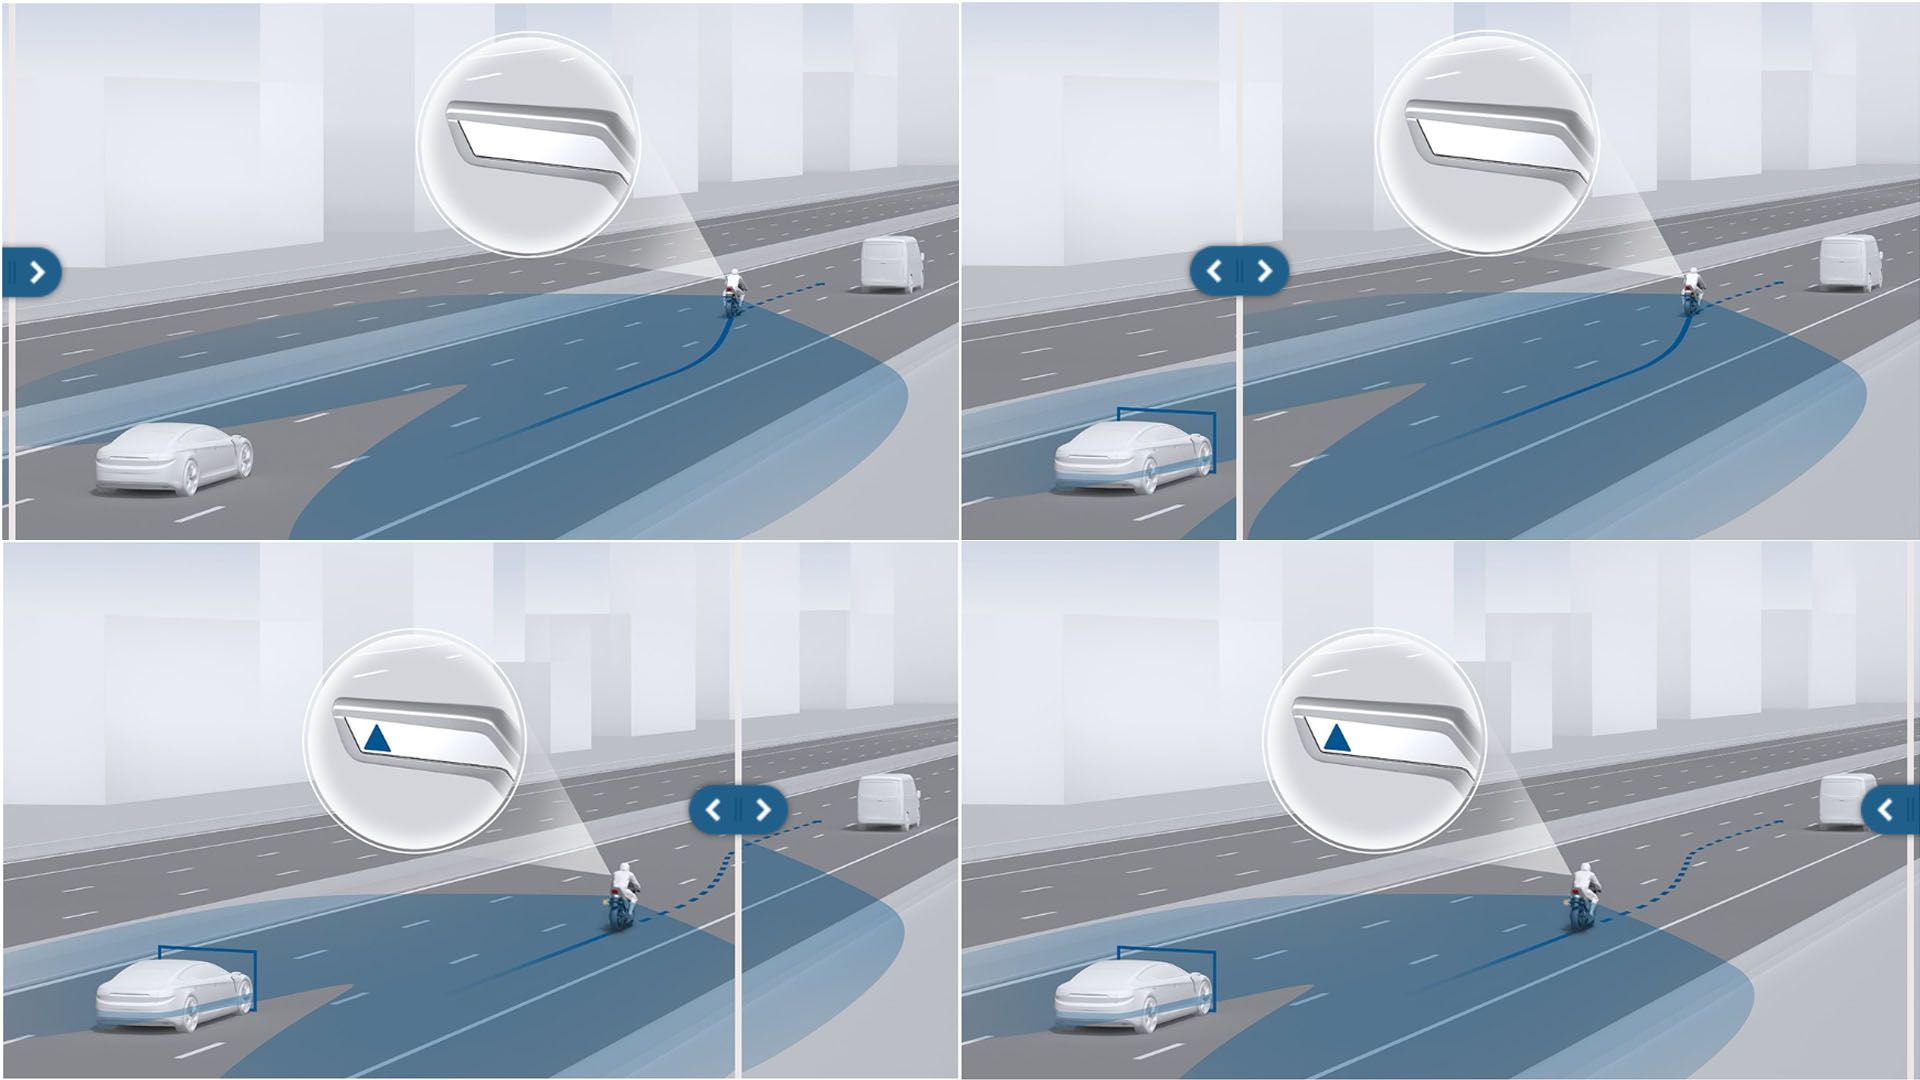  Blind spot detection registers objects in hard-to-see areas and uses an optical signal to warn the rider if the situation becomes dangerous.